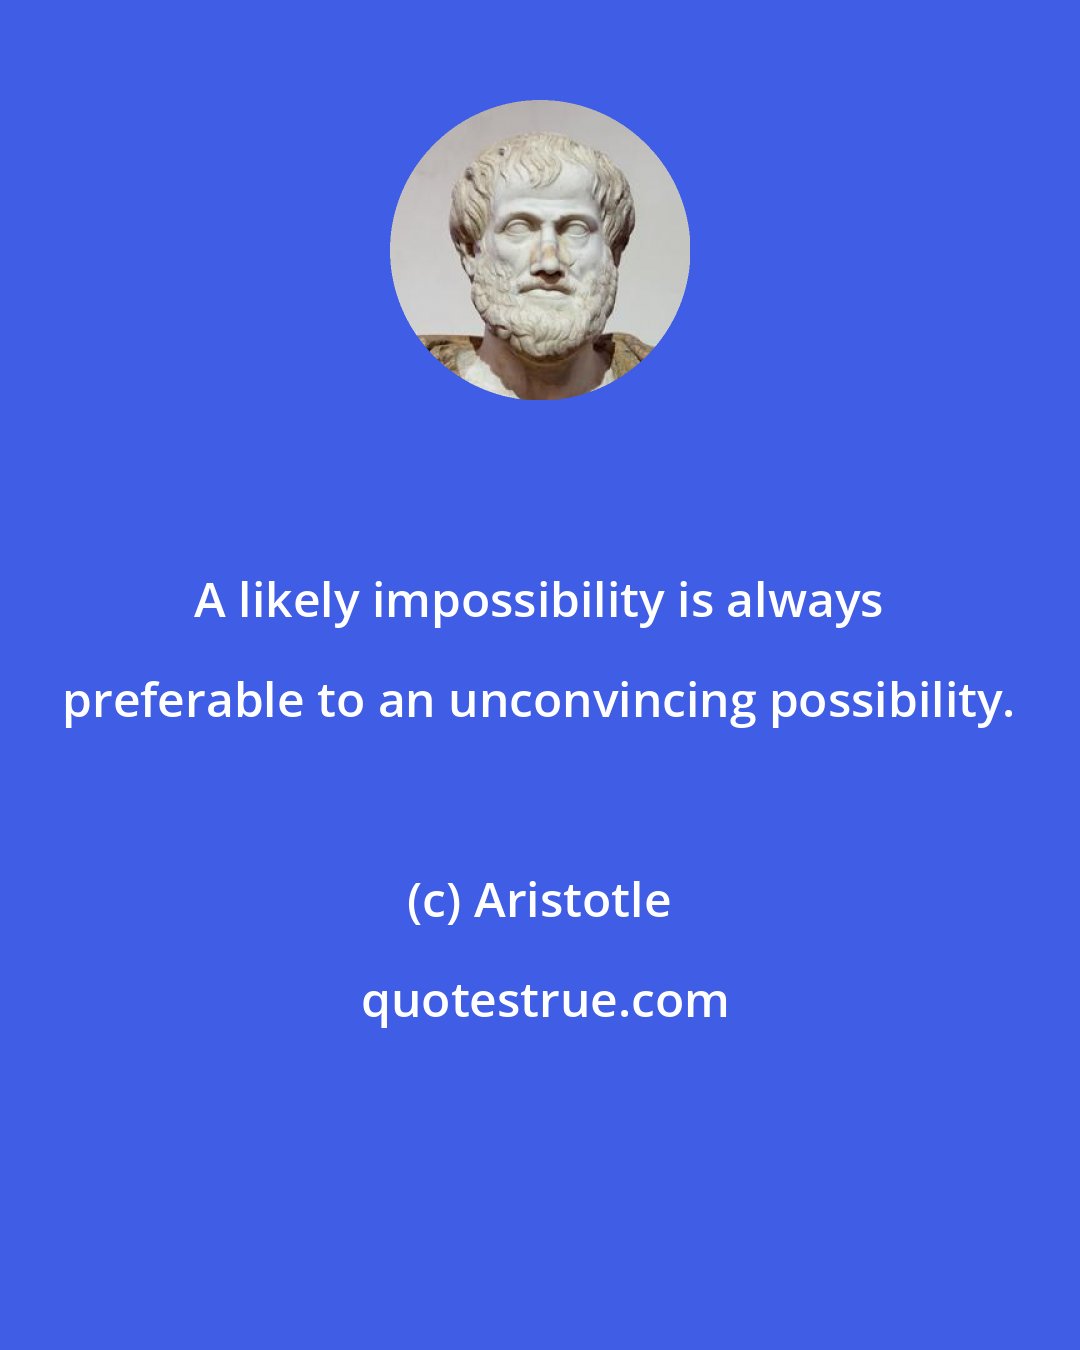 Aristotle: A likely impossibility is always preferable to an unconvincing possibility.